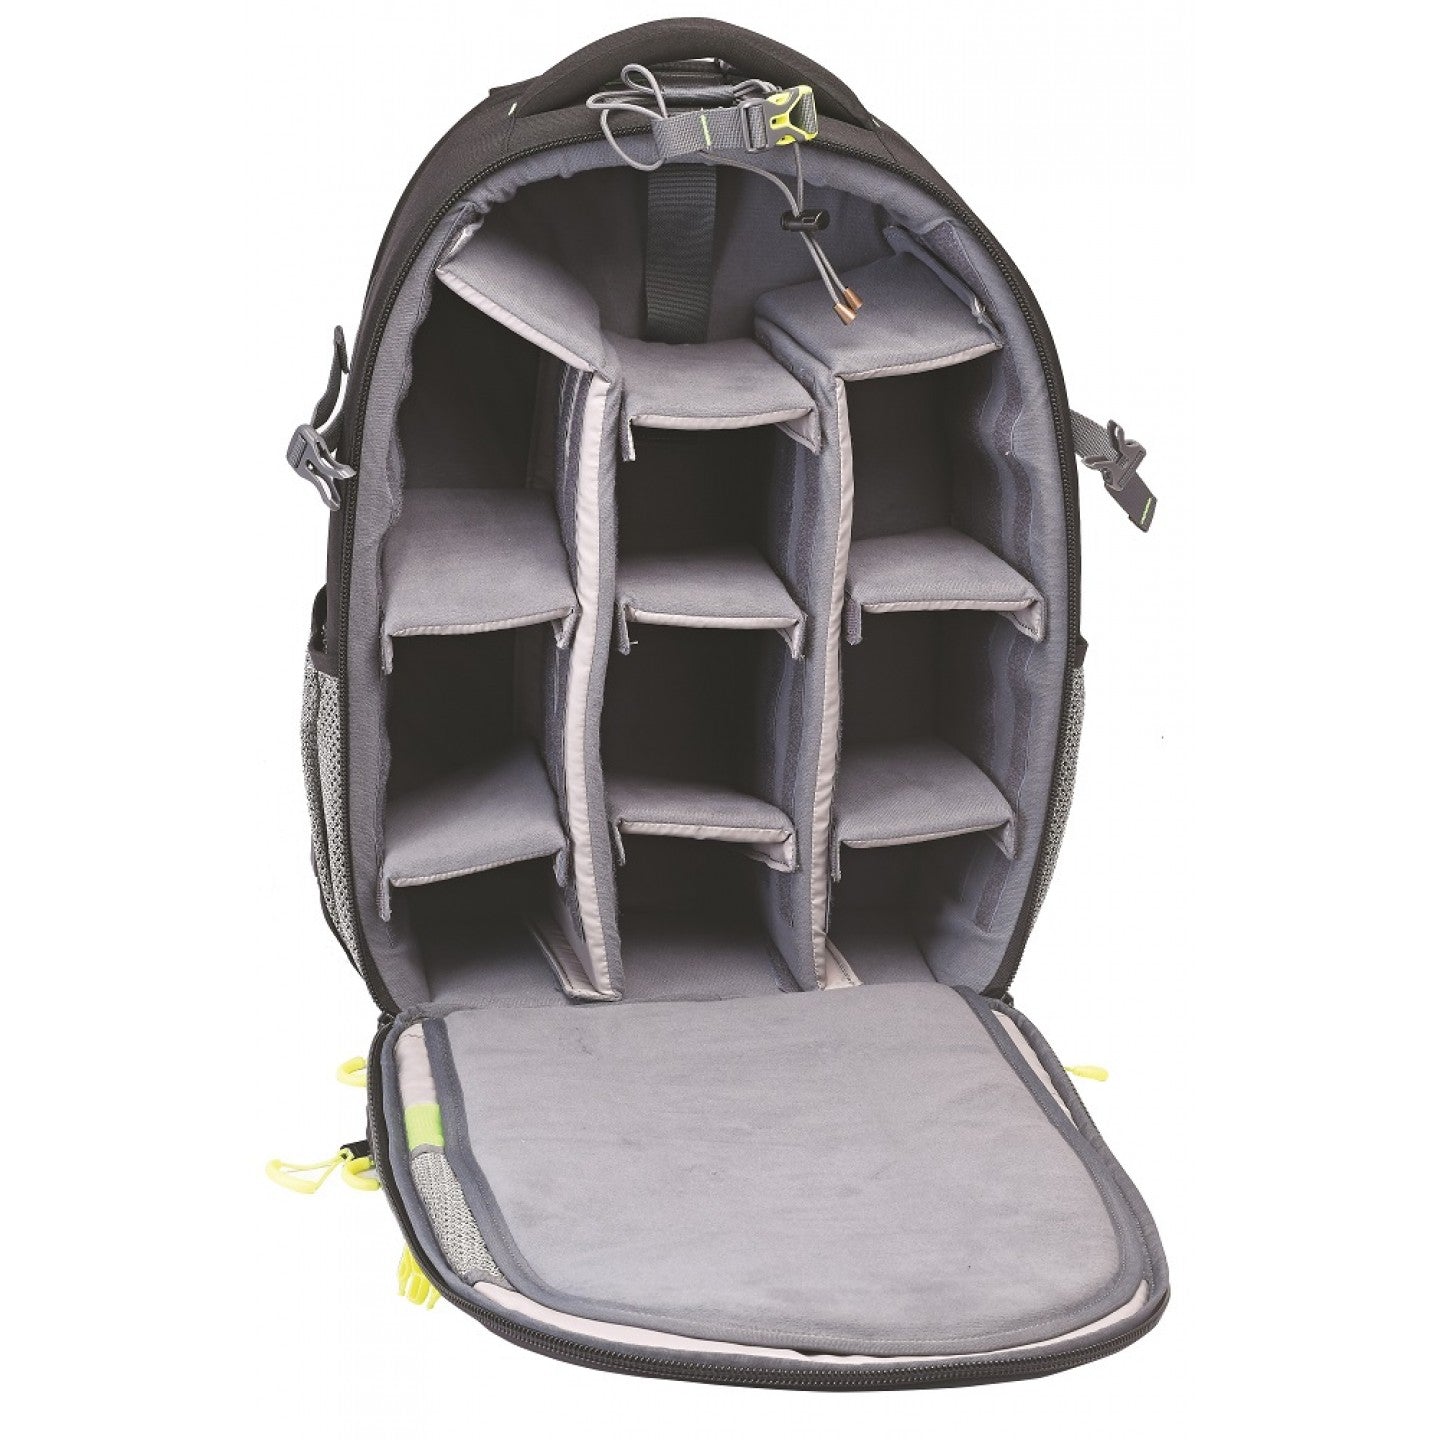 Image: Front view of the open P54 Eye Q DSLR camera bag, showcasing its spacious compartments and customizable dividers. The empty bag provides ample storage space for DSLR cameras and accessories, allowing for convenient organization and quick access during photography sessions. Stay prepared and organized with the P54 Eye Q.